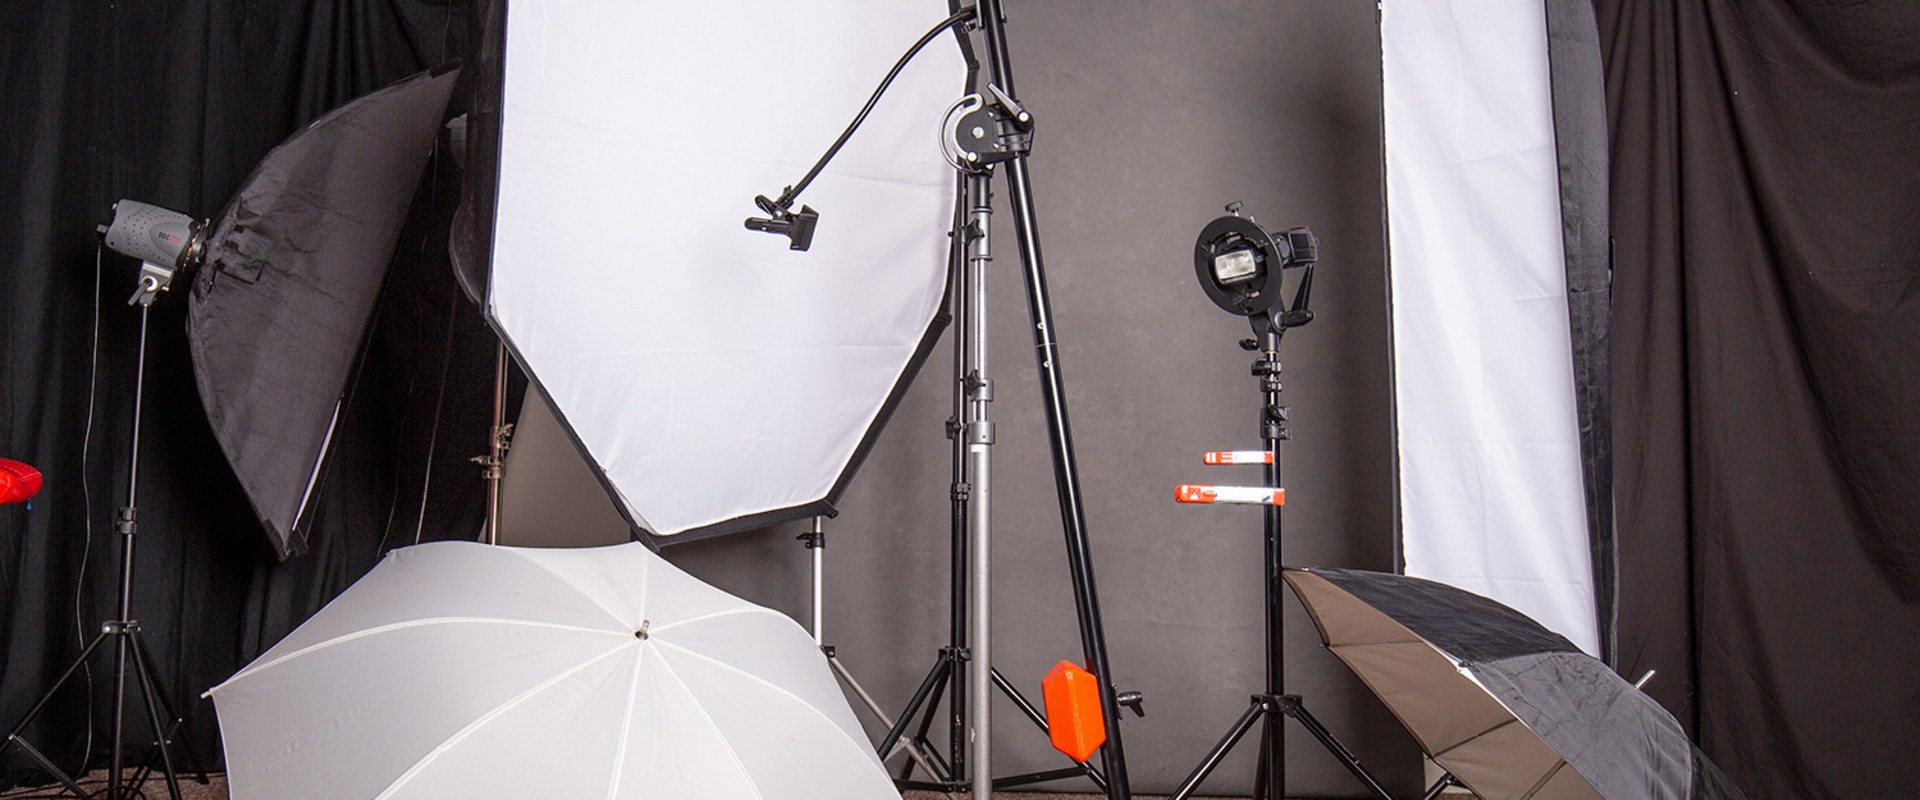 Lighting Equipment: How to Choose and Use it in Photography